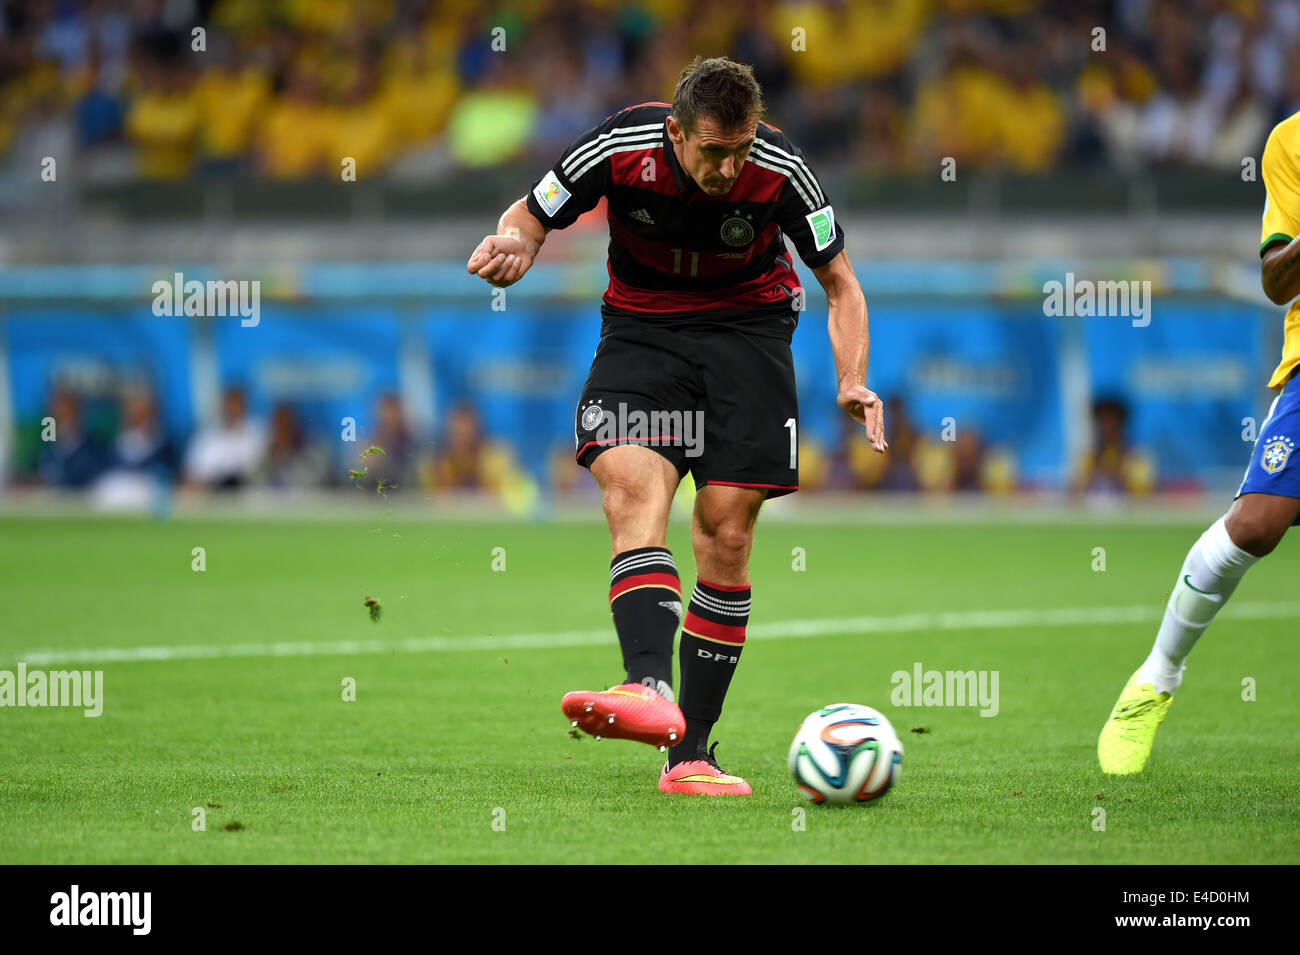 Belo Horizonte, Brazil. 8th July, 2014. Miroslav Klose (GER) Football/Soccer : Miroslav Klose of Germany scores his team's second goal during the FIFA World Cup 2014 semi-finals match between Brazil 1-7 Germany at Mineirao stadium in Belo Horizonte, Brazil . Credit:  FAR EAST PRESS/AFLO/Alamy Live News Stock Photo